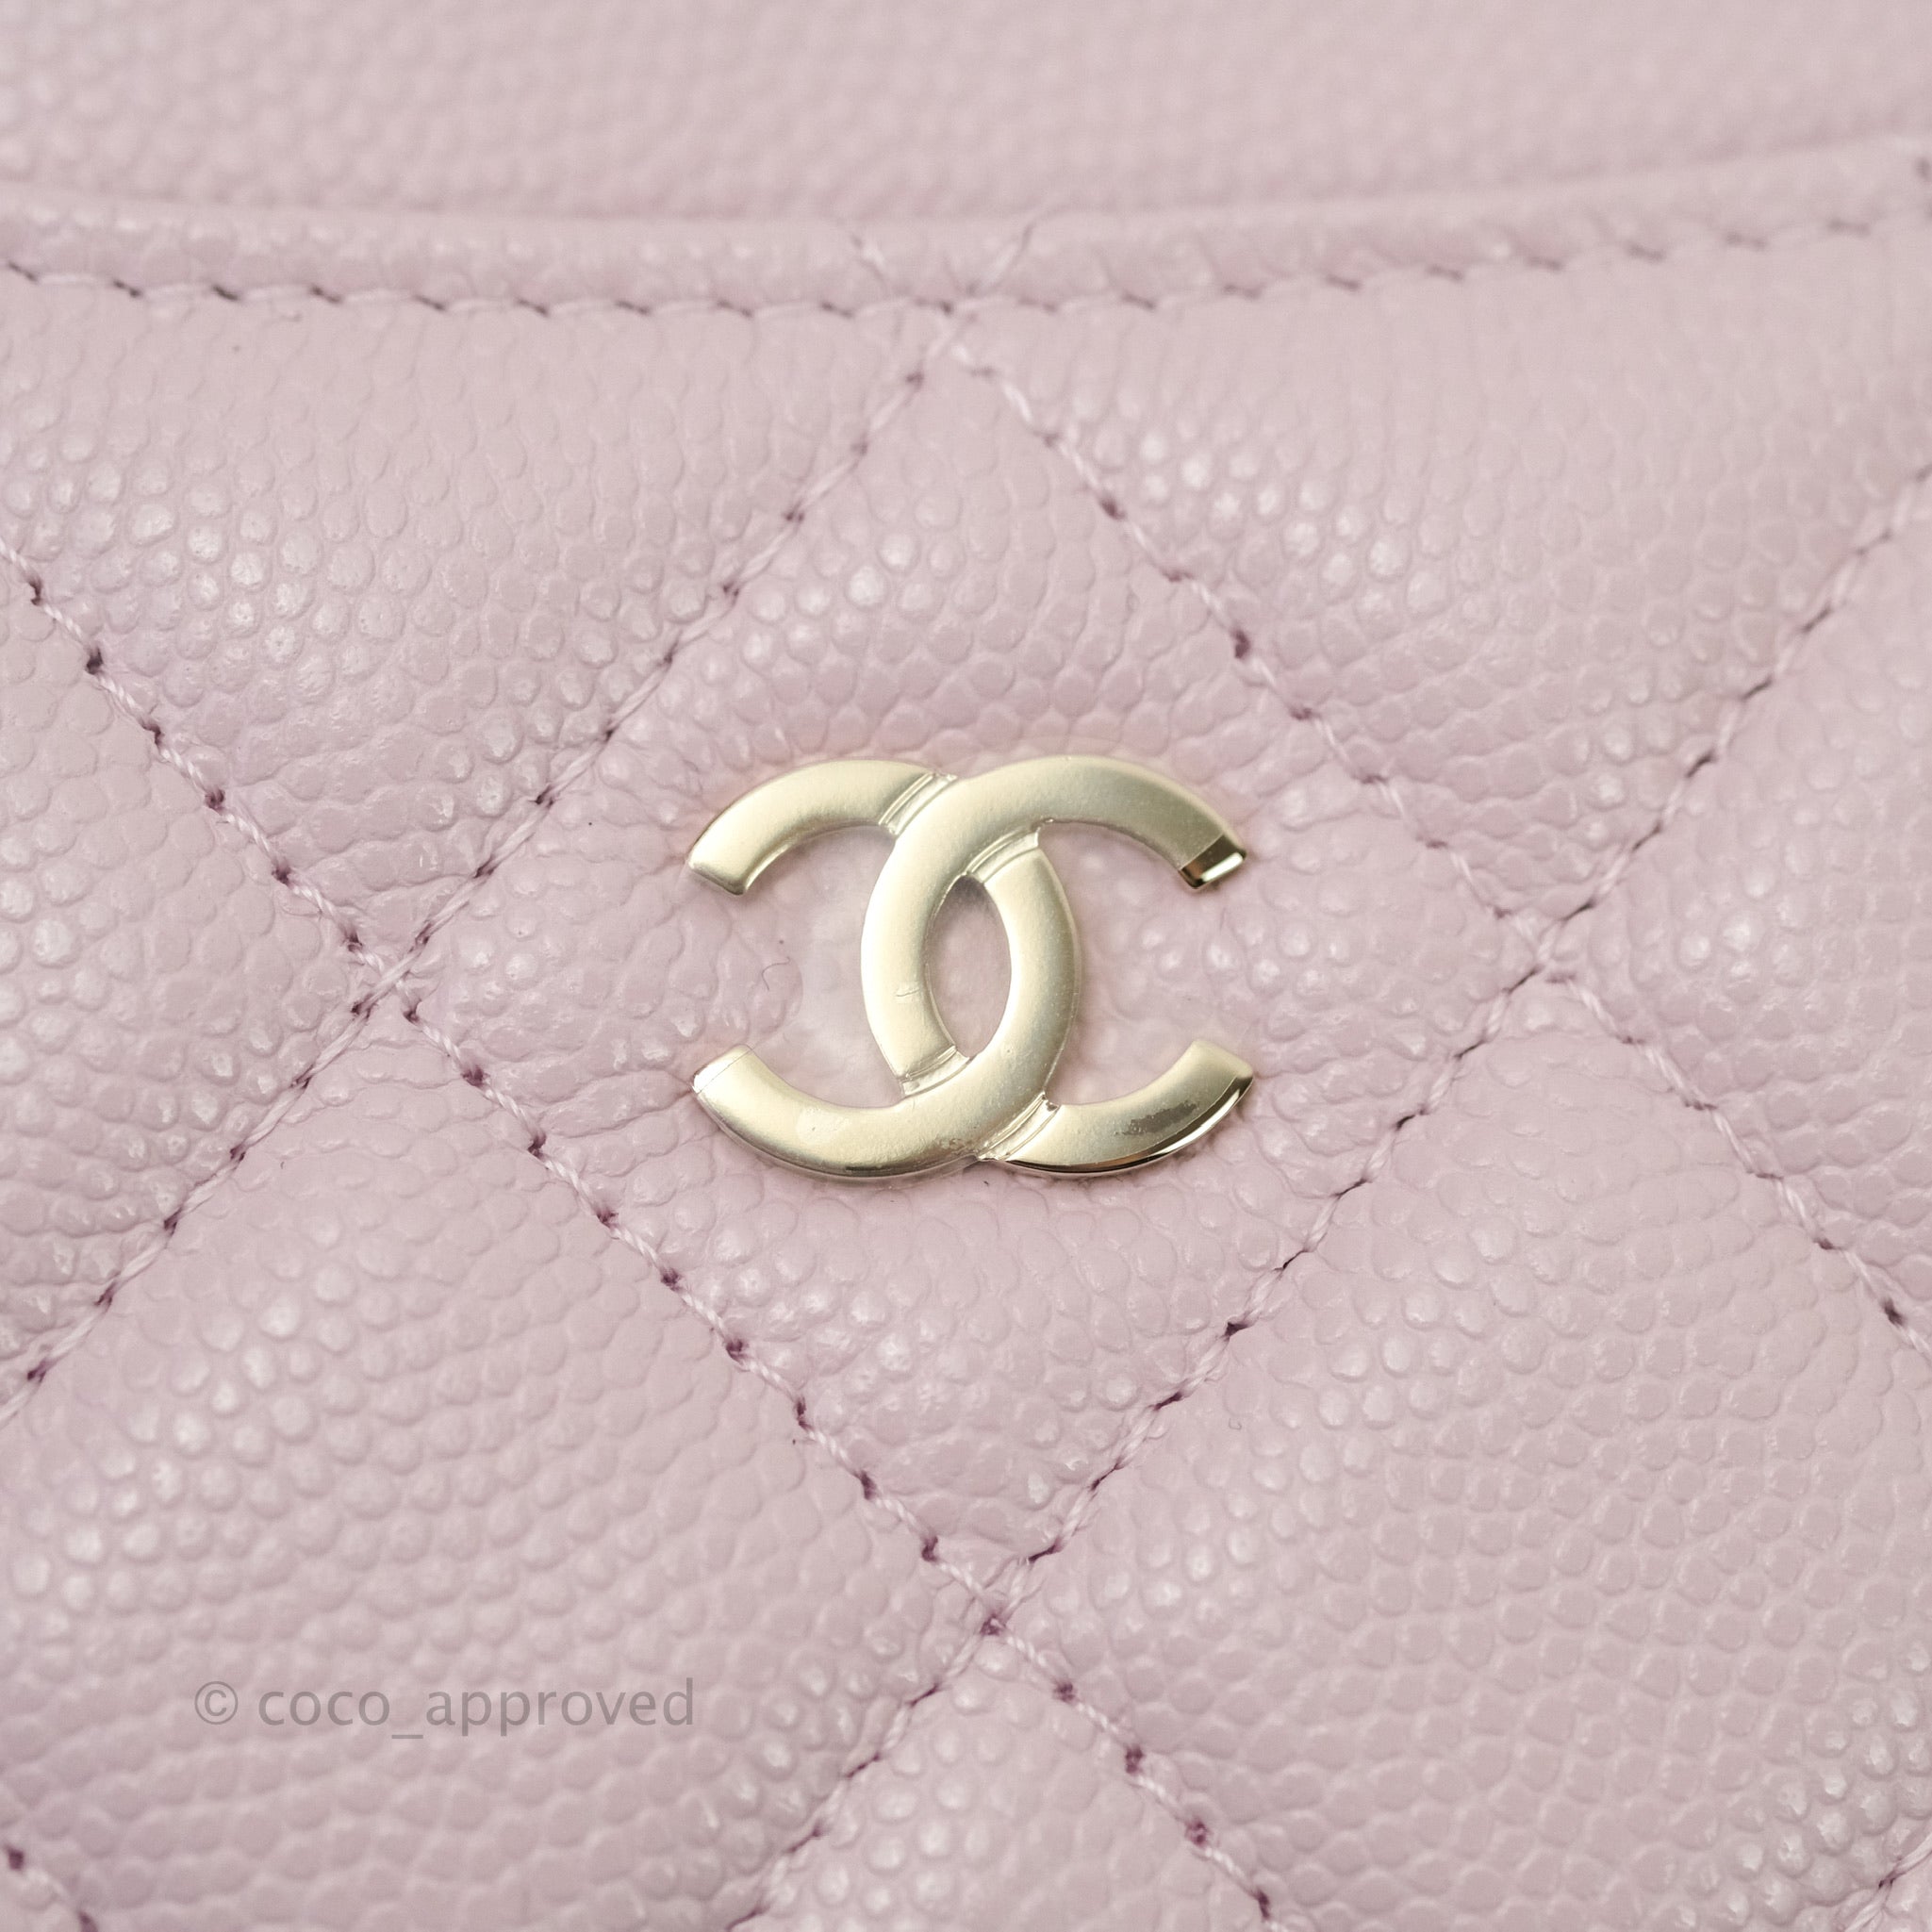 Chanel Quilted Classic Lilac Rose Clair Caviar Gold Hardware Flat